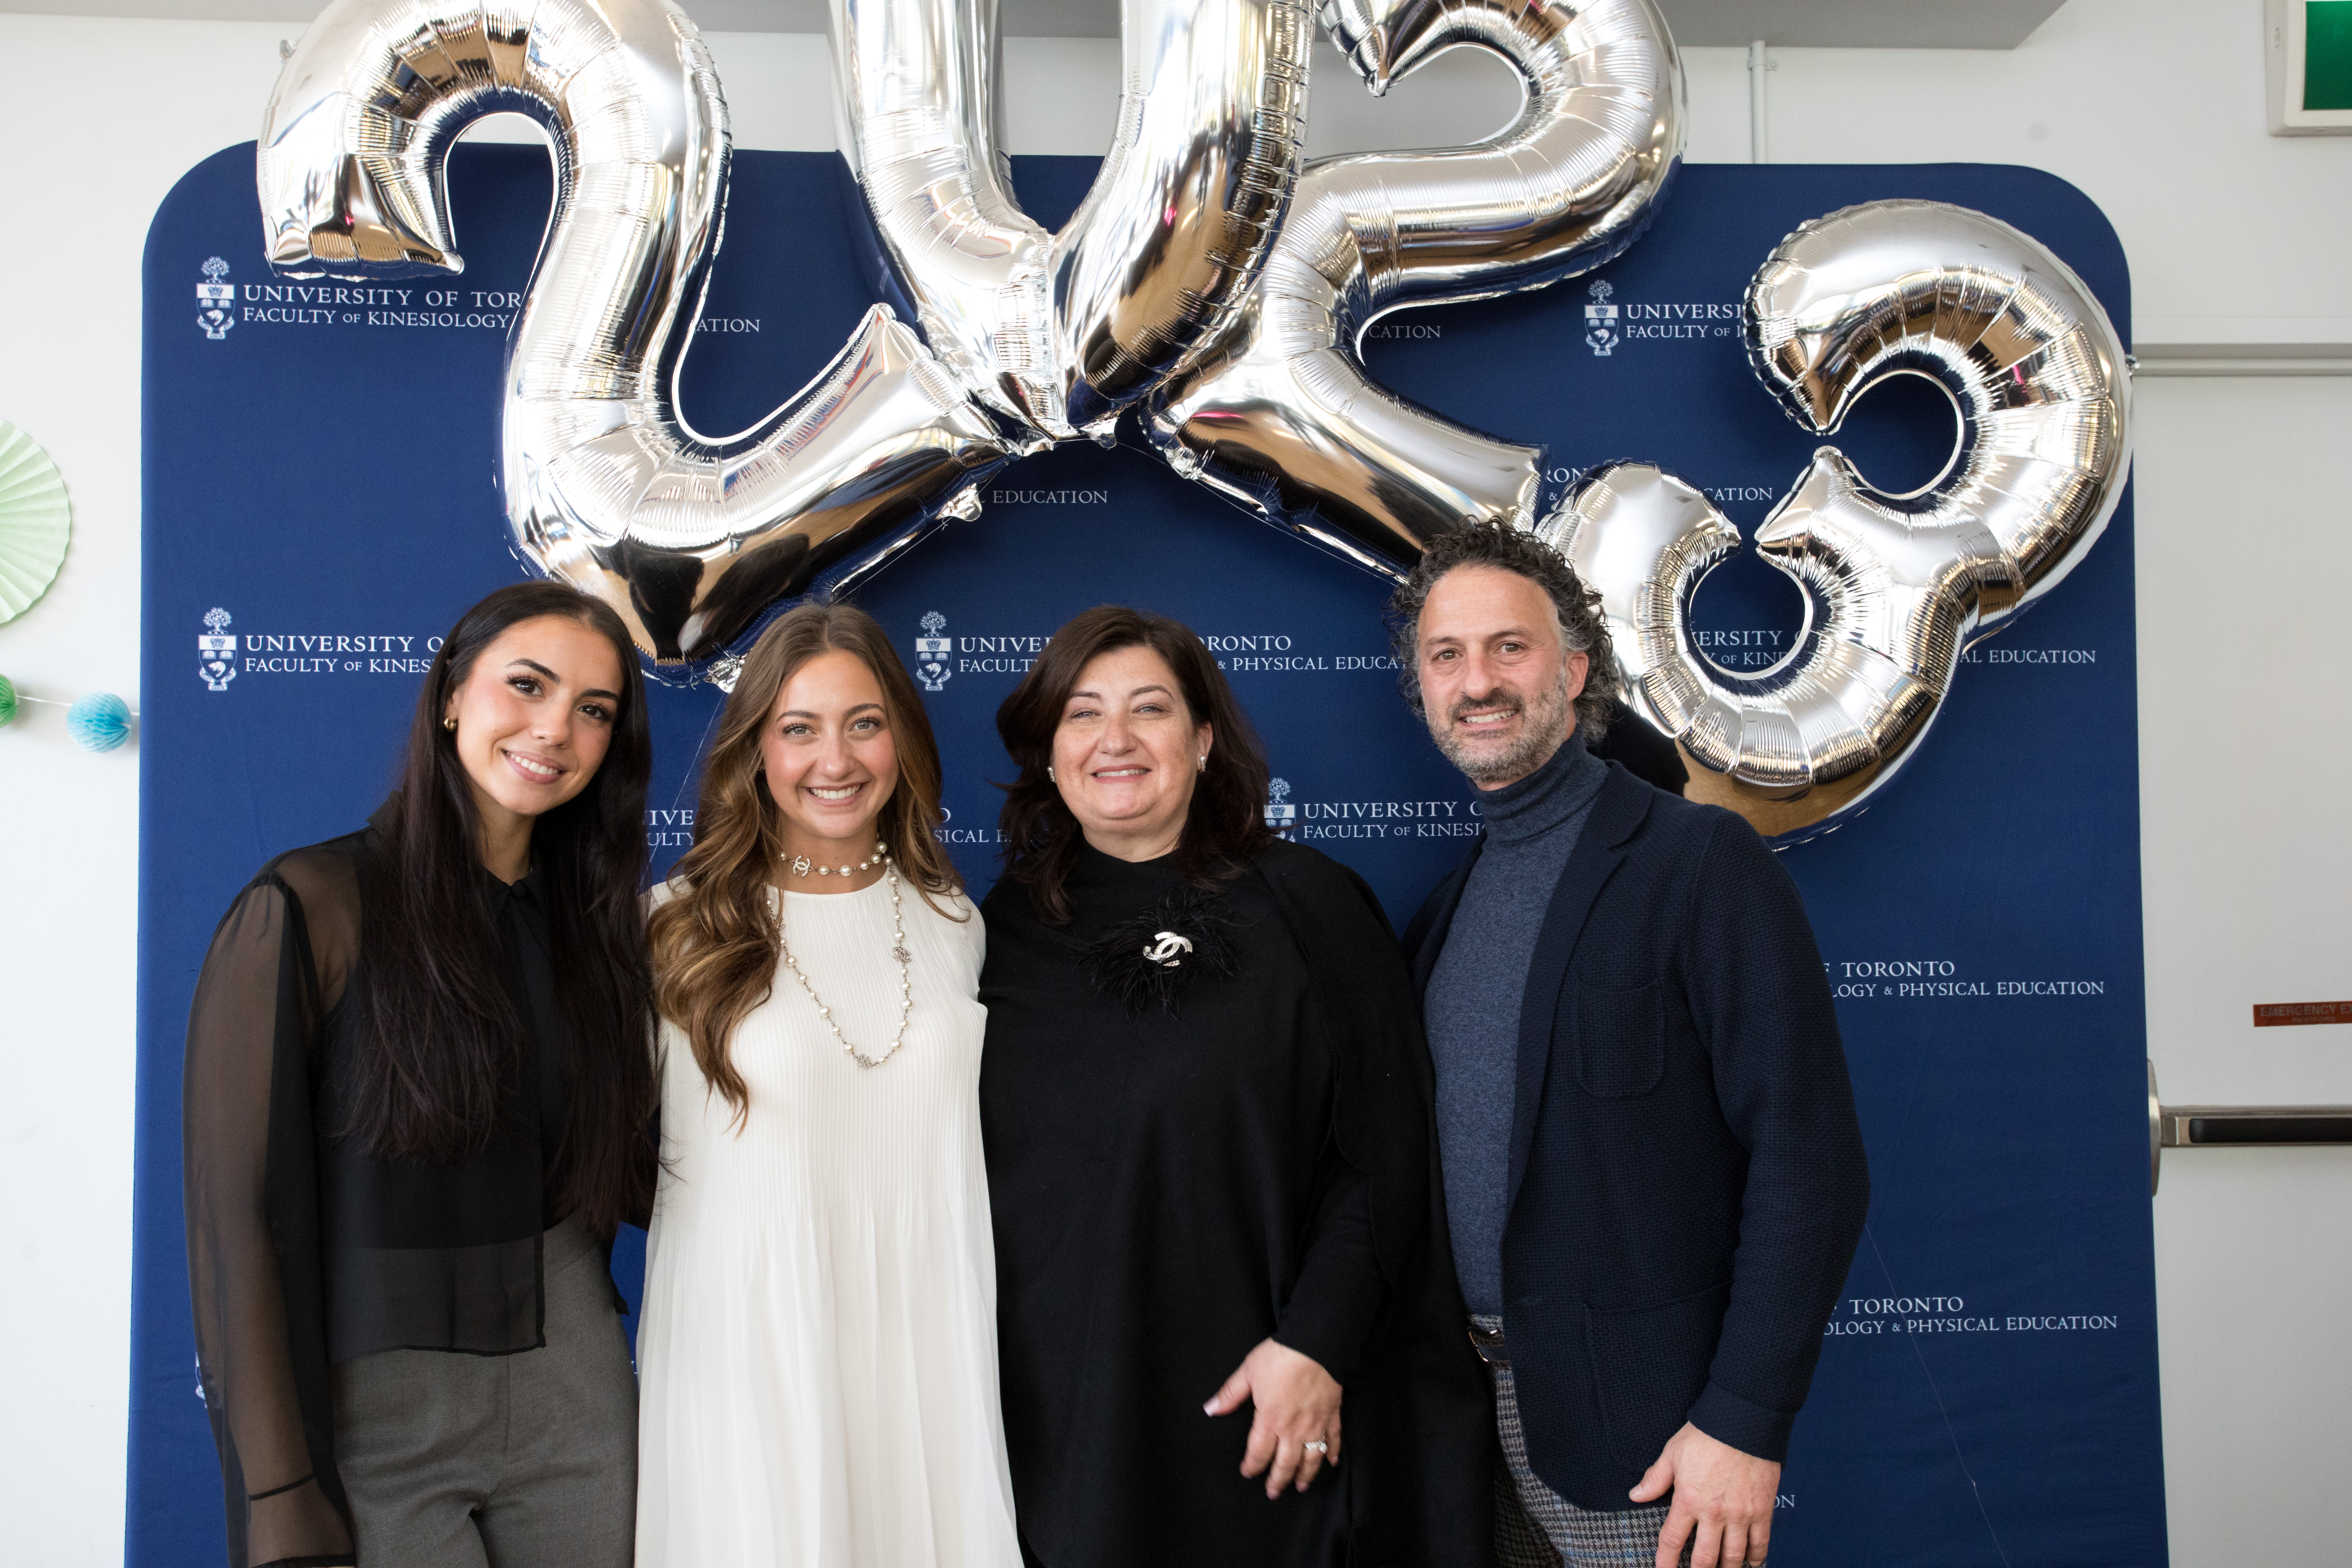 Francesca Tatangelo with family in front of faculty backdrop and balloons